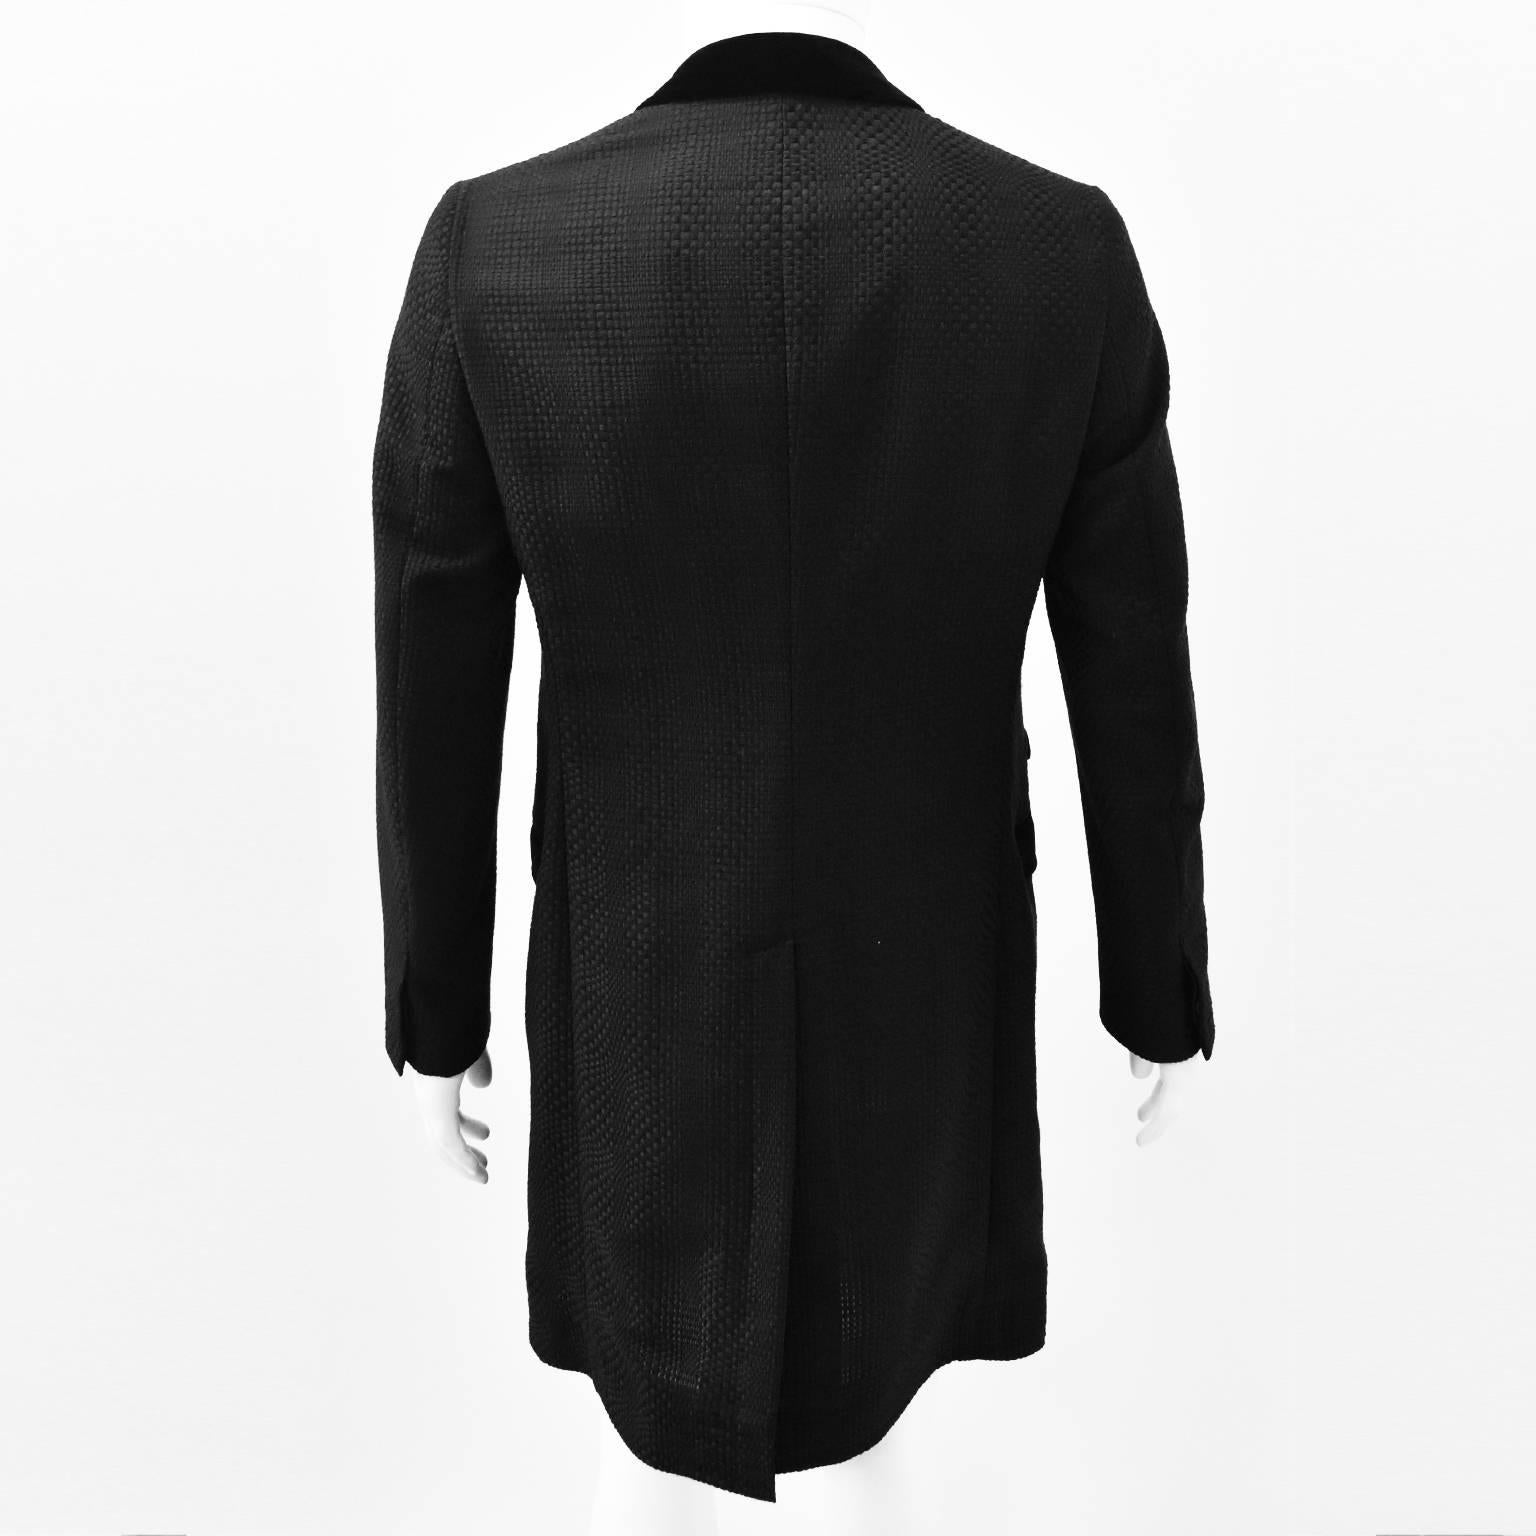 Alexander McQueen Black Woven Coat with Contrast Velvet Collar and Pockets S/S 1 For Sale 1